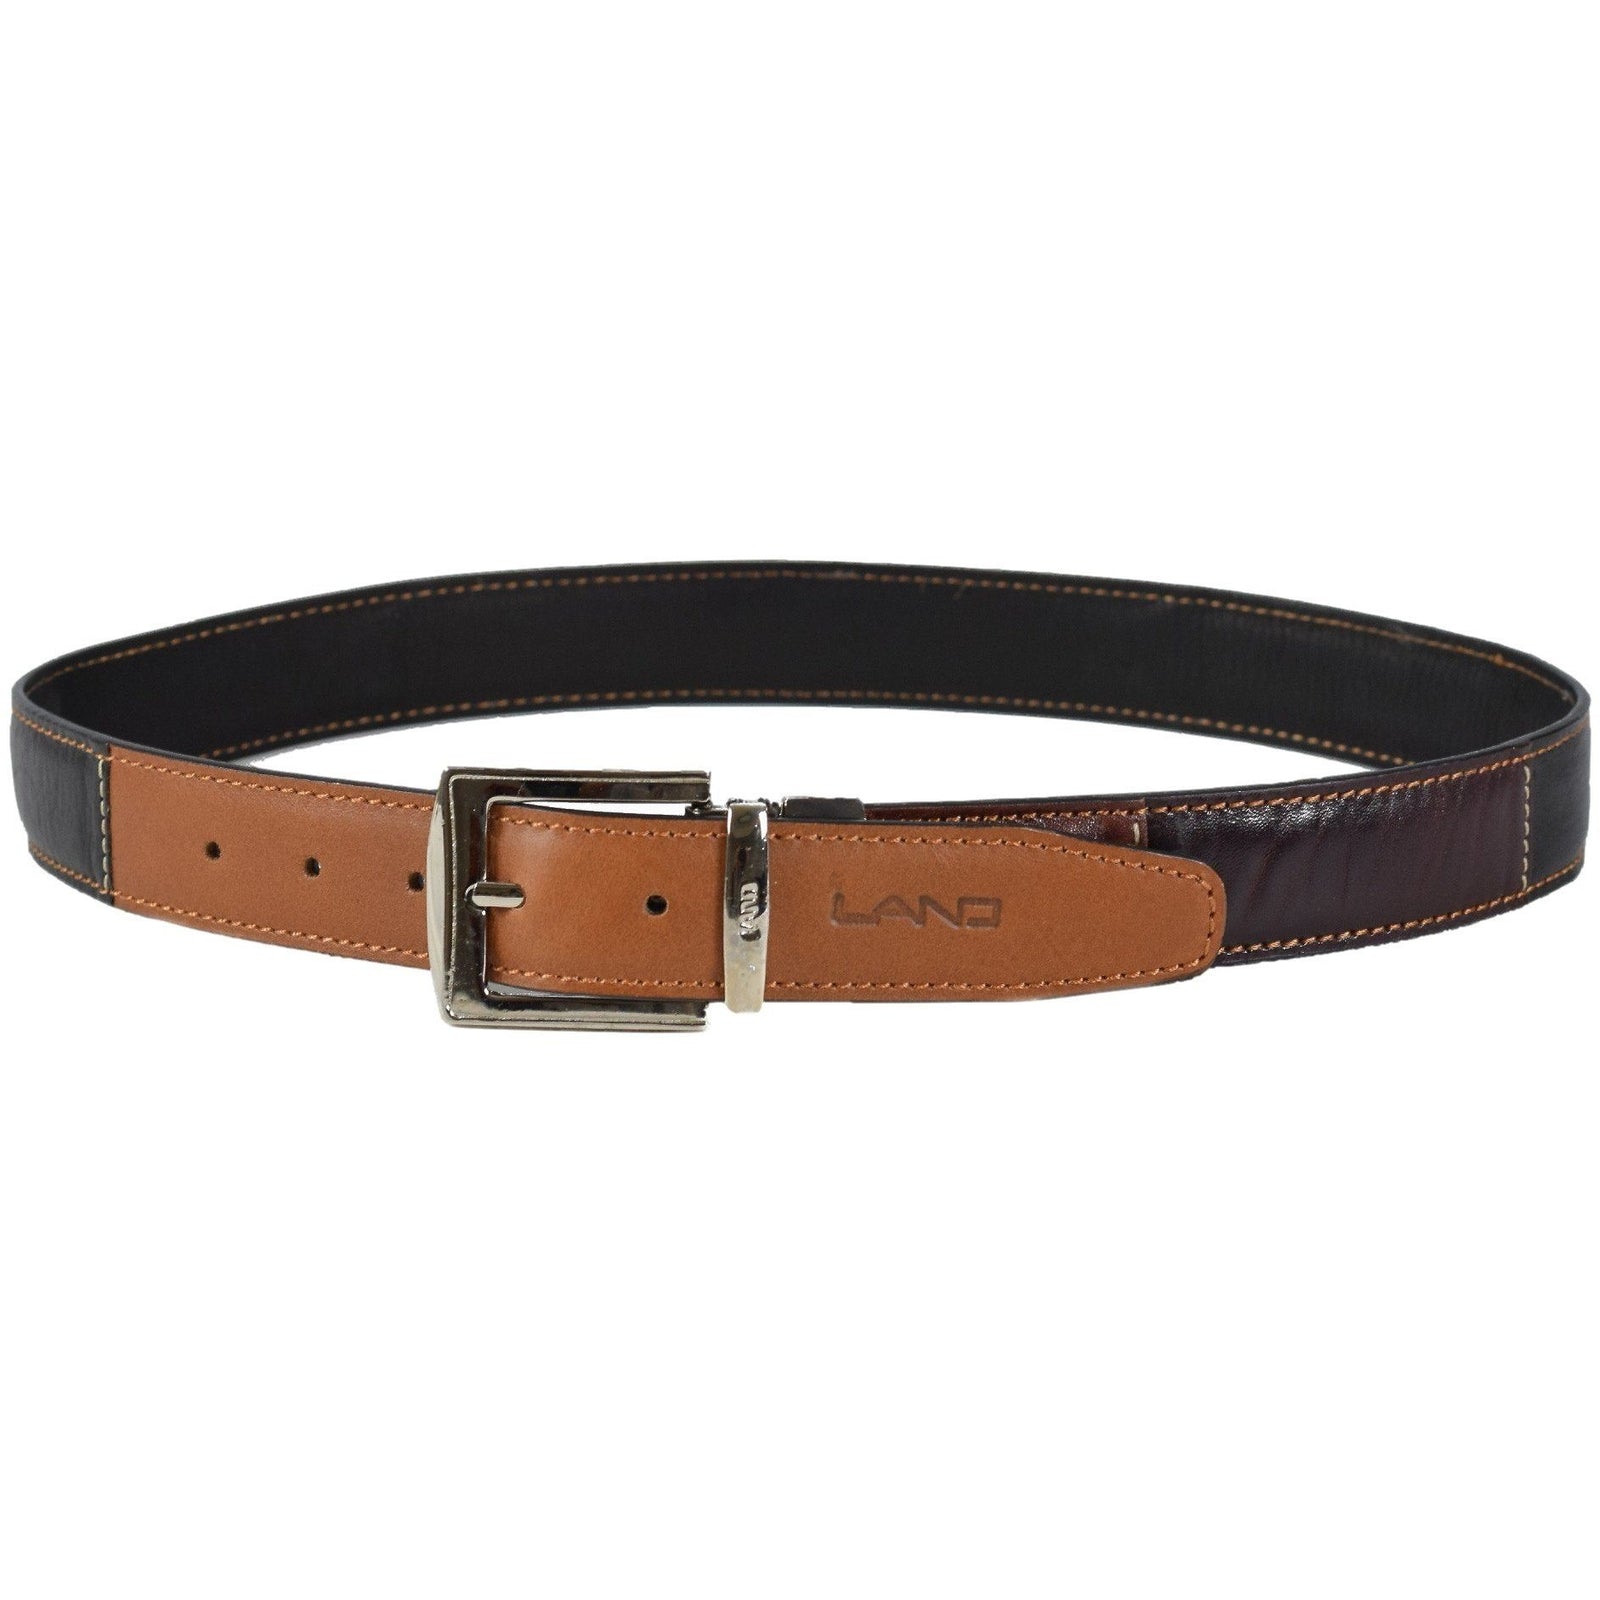 Leather Belts | LAND Leather Goods